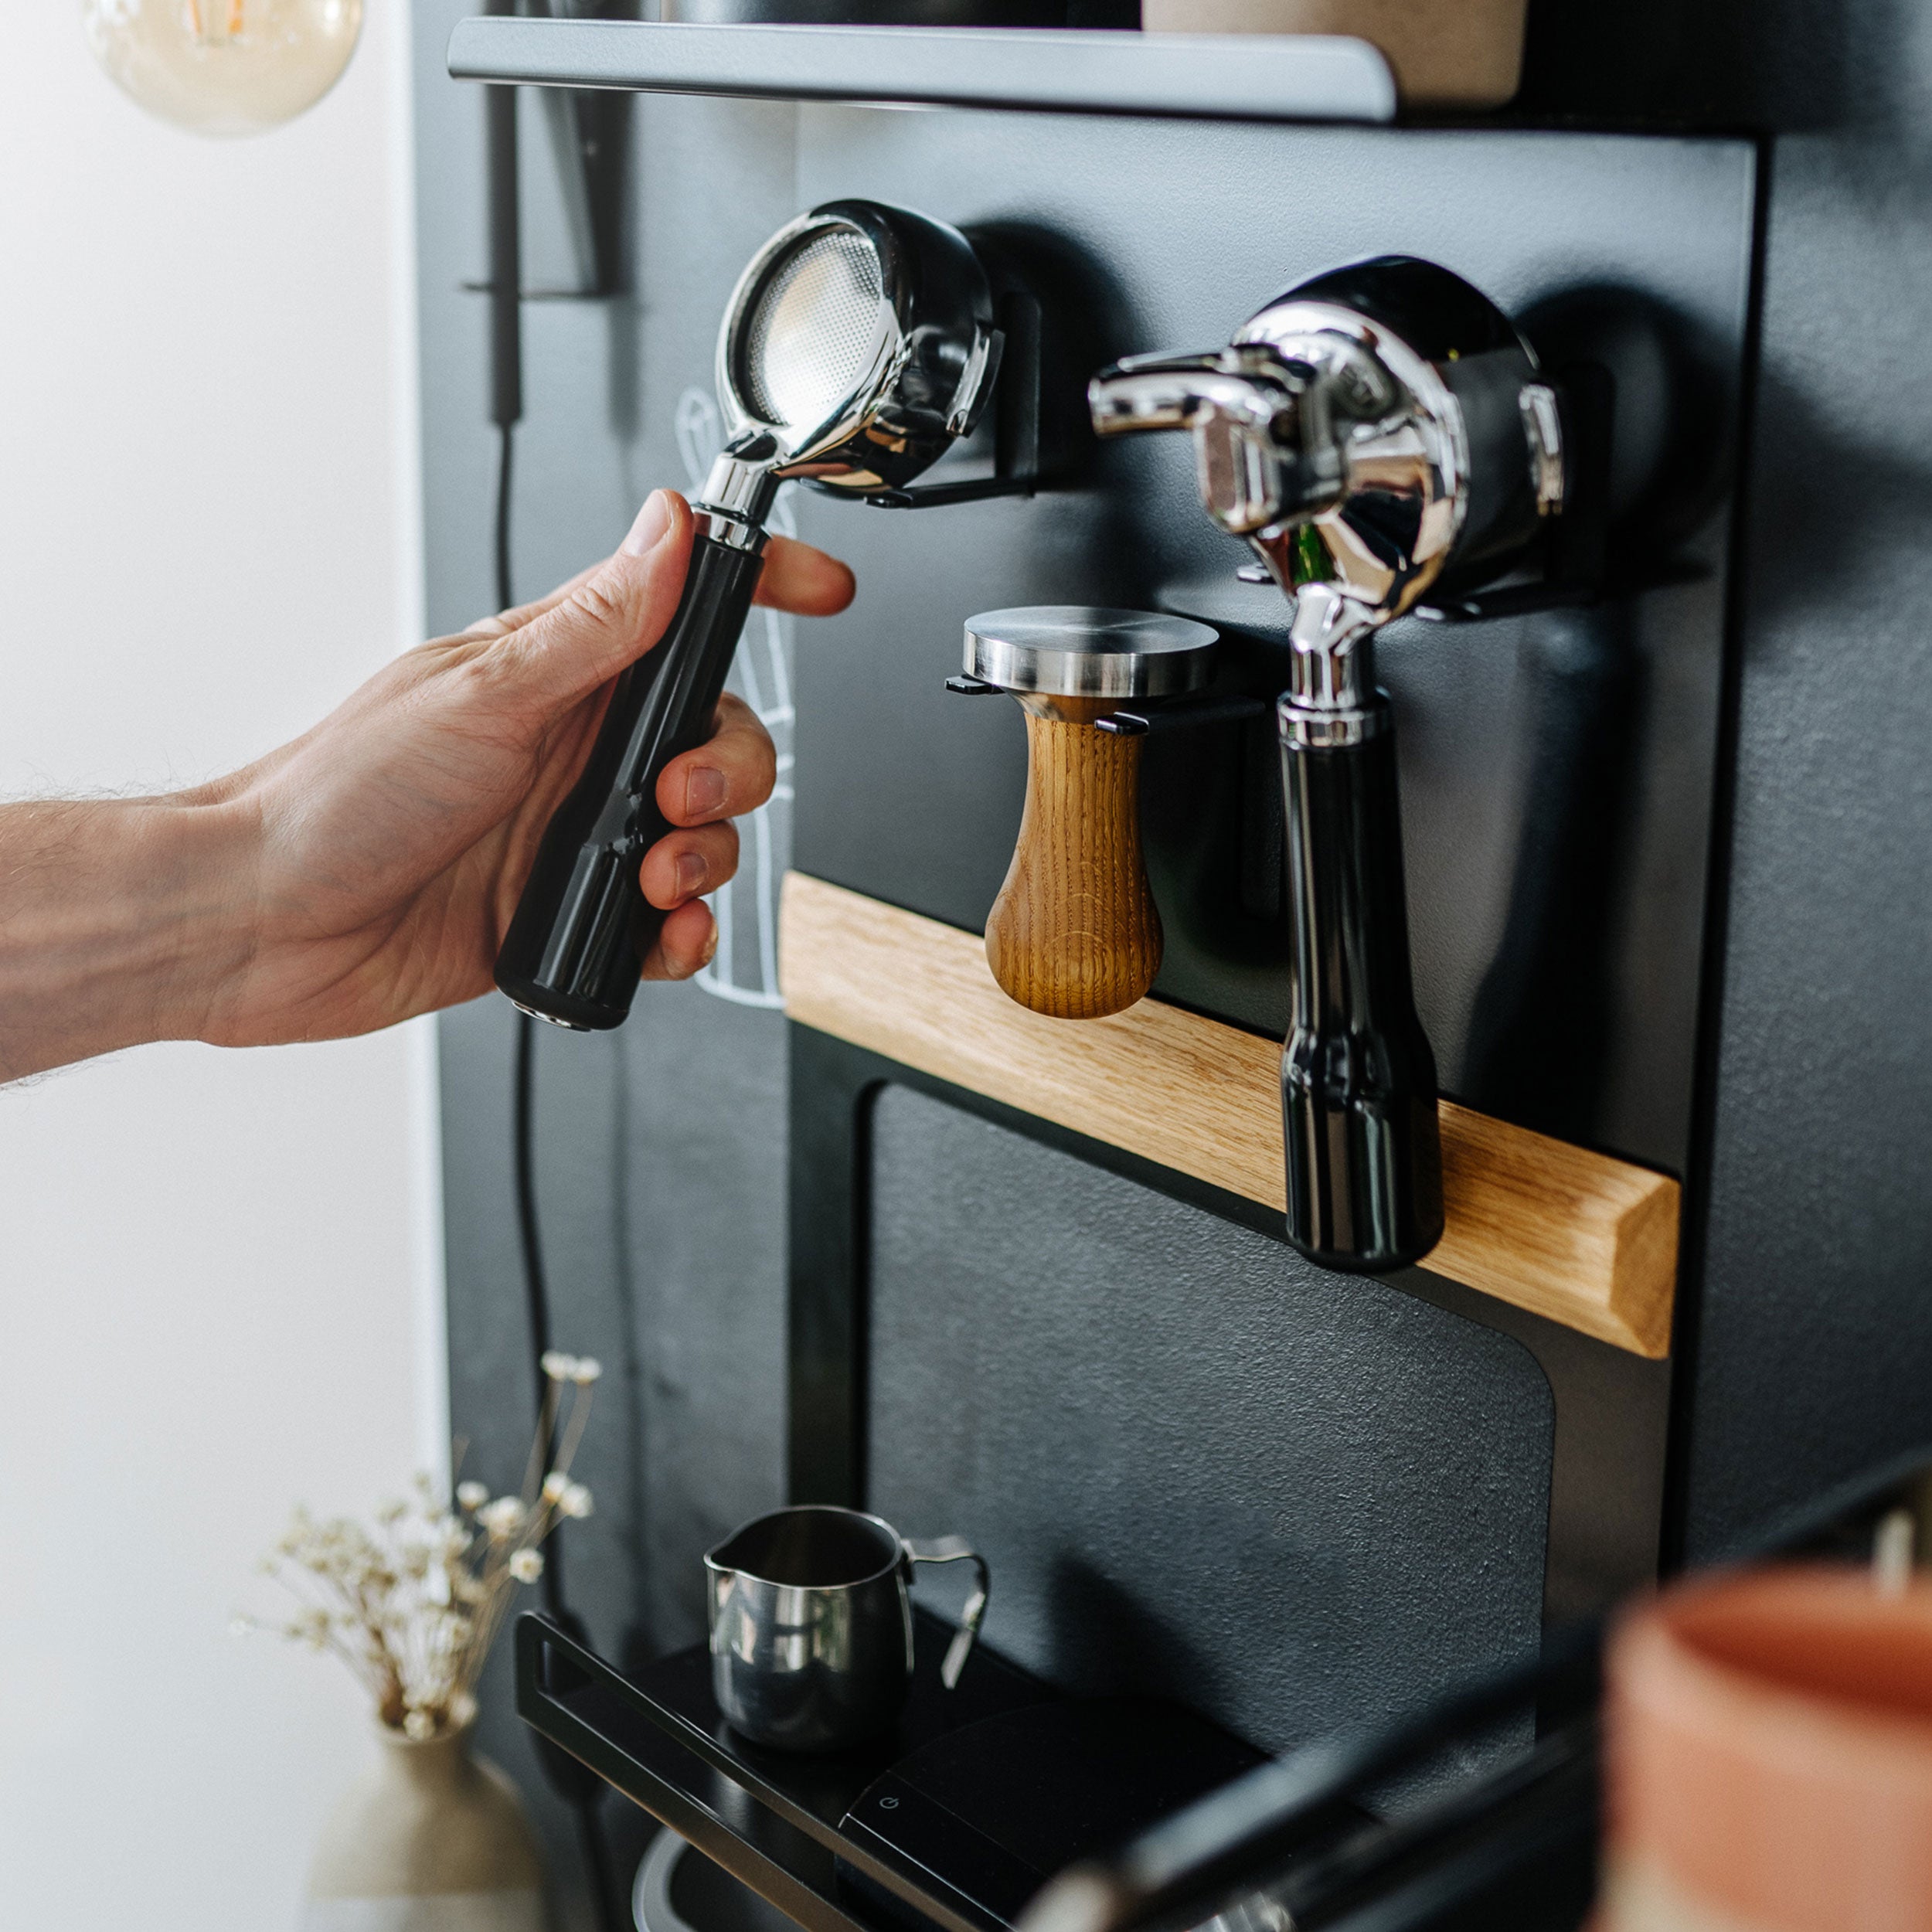 FLATE® Barista Rack: Shelve for portafilters and barista accessories